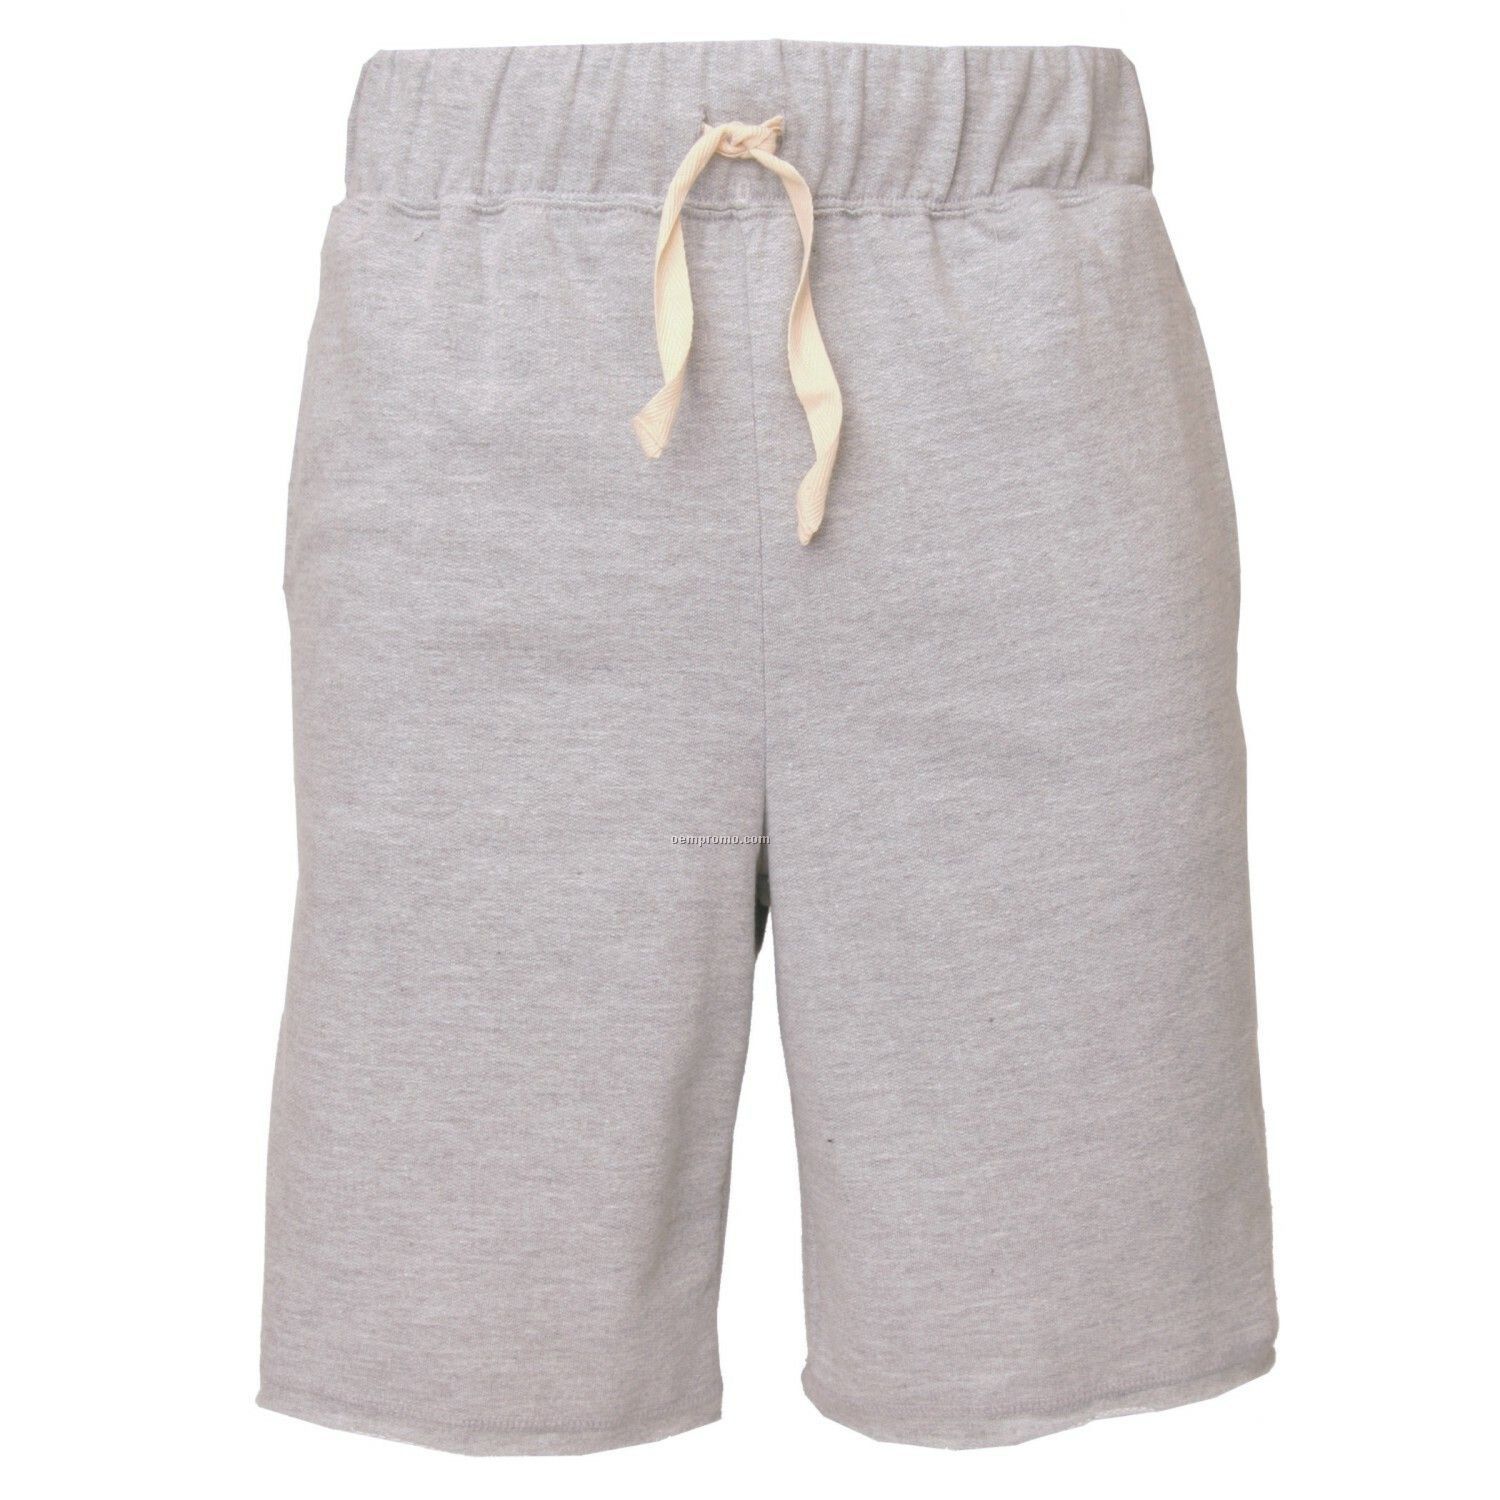 Adult Heather Gray First Place Fleece Short With 2 Side Pockets